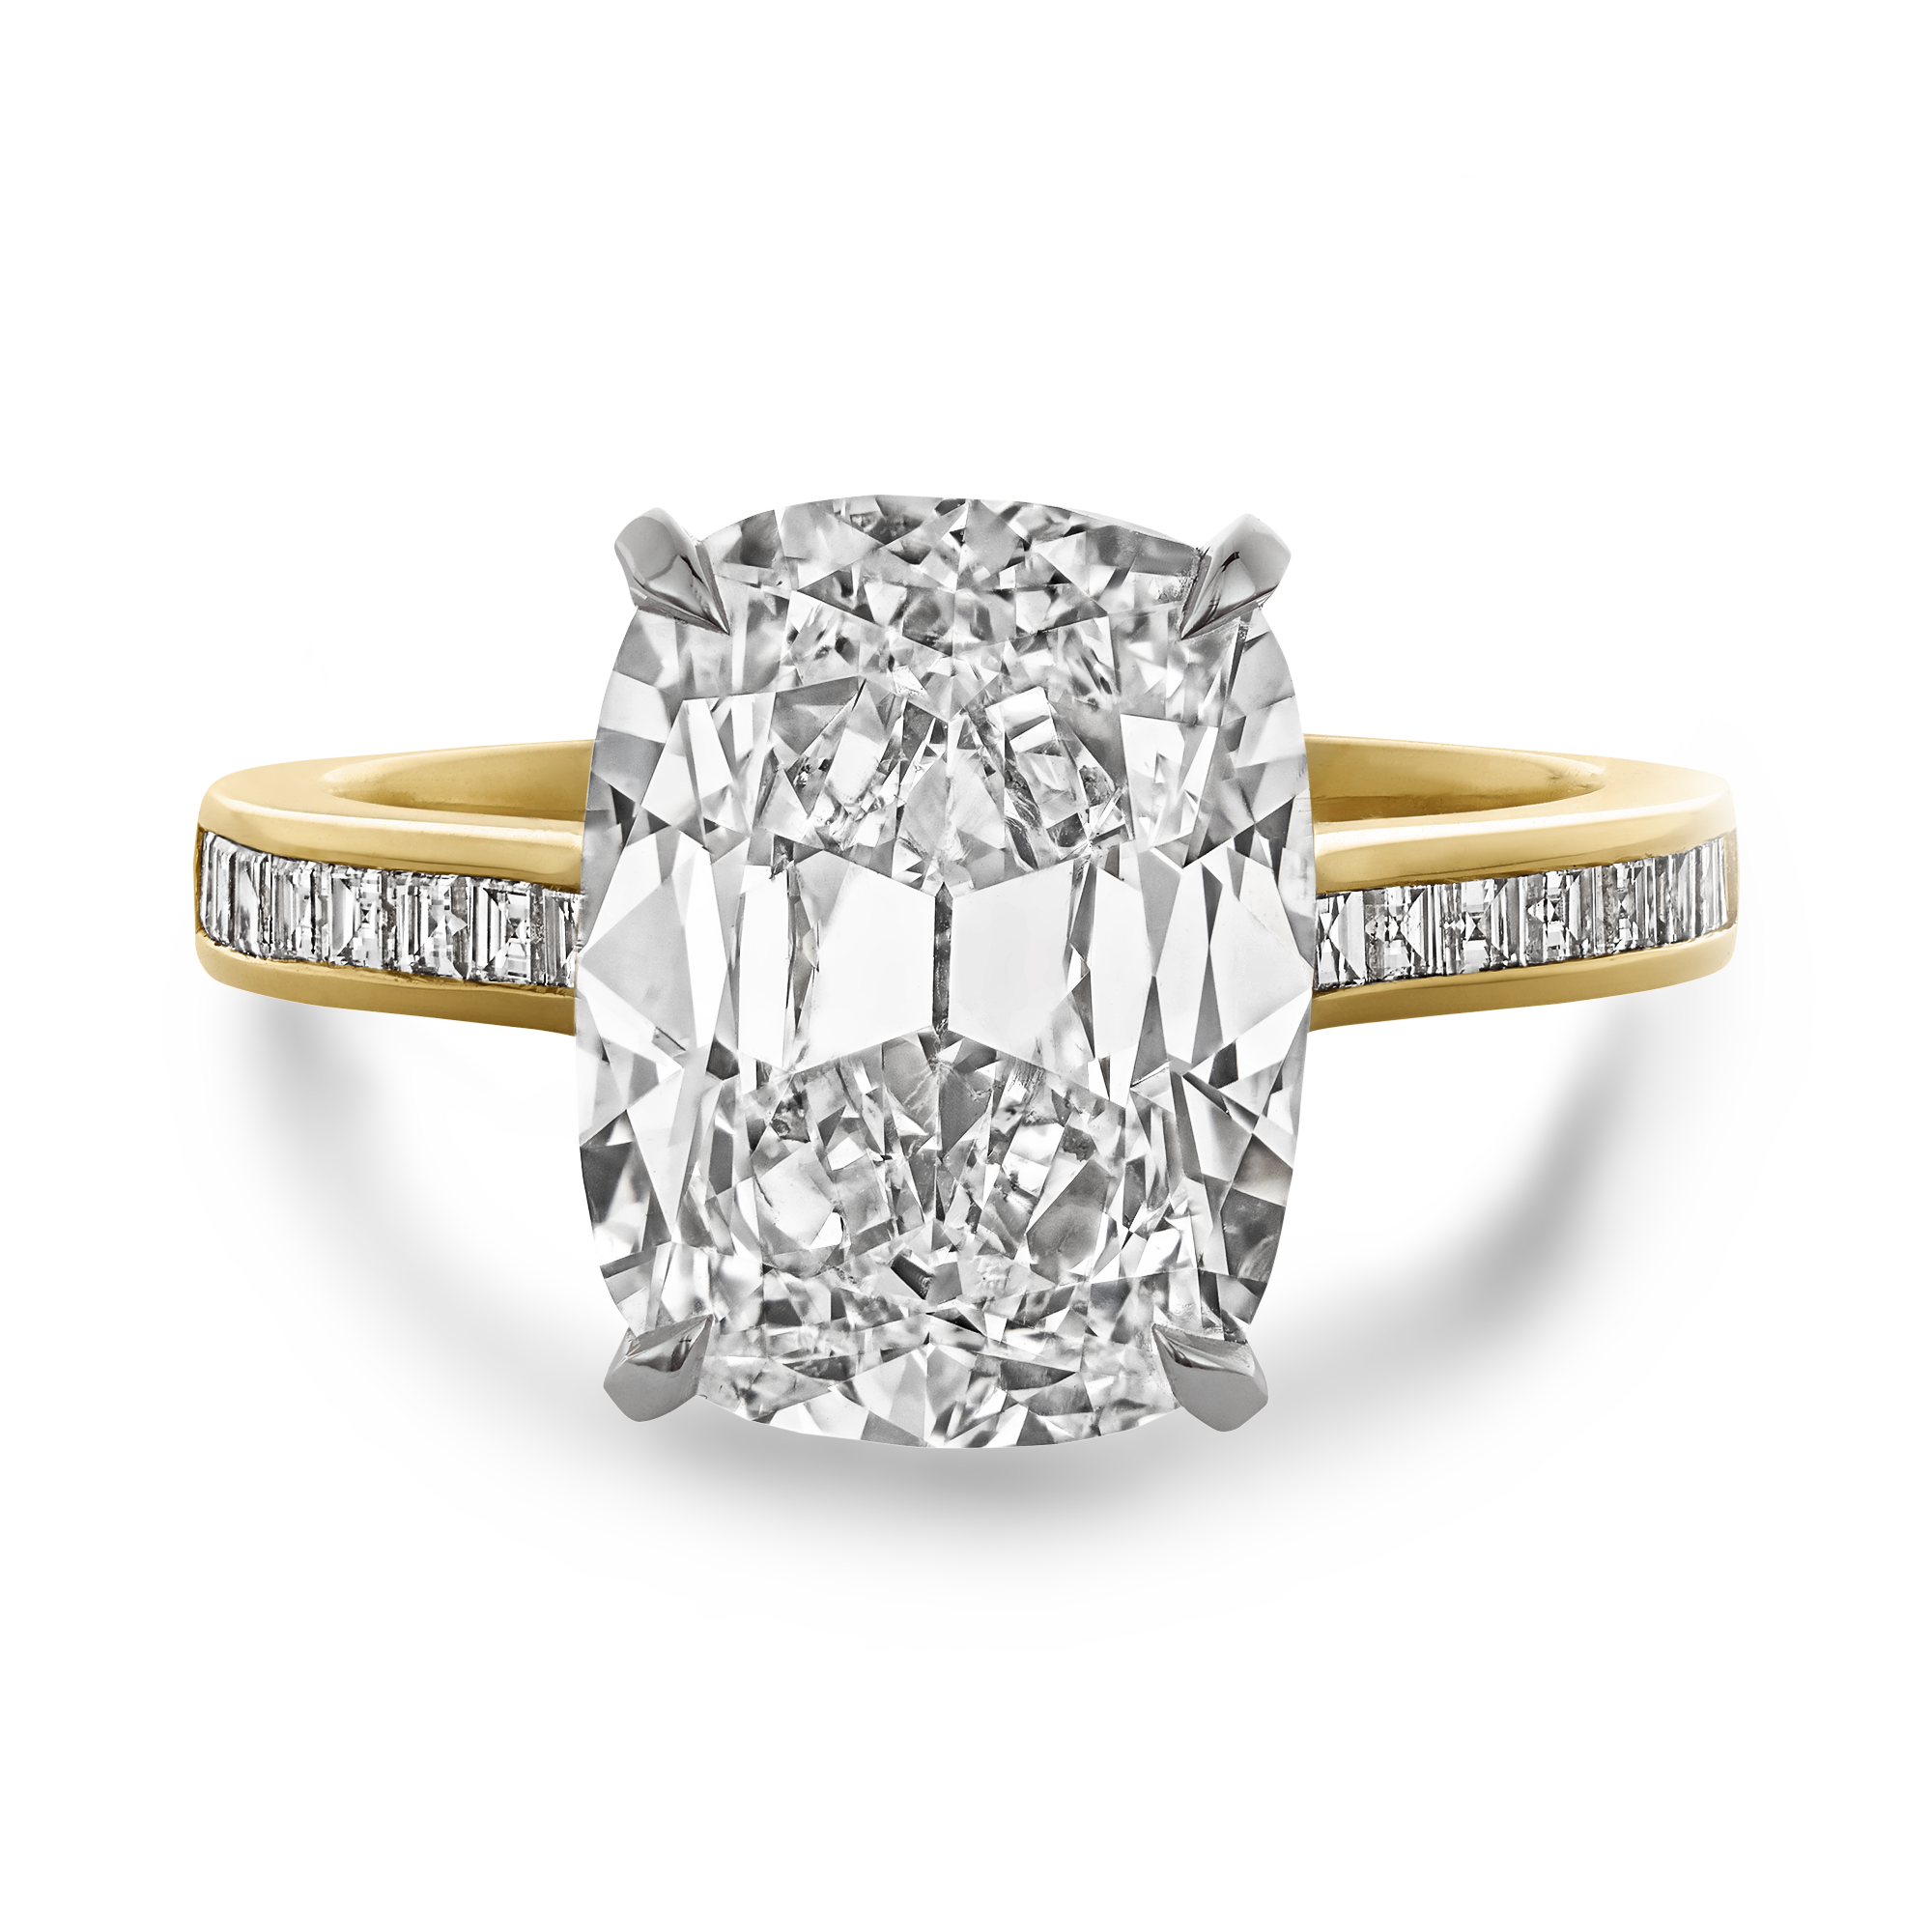 Masterpiece Deco Setting 5.02ct Diamond Solitaire Ring Cushion Antique Cut, Claw Set_2